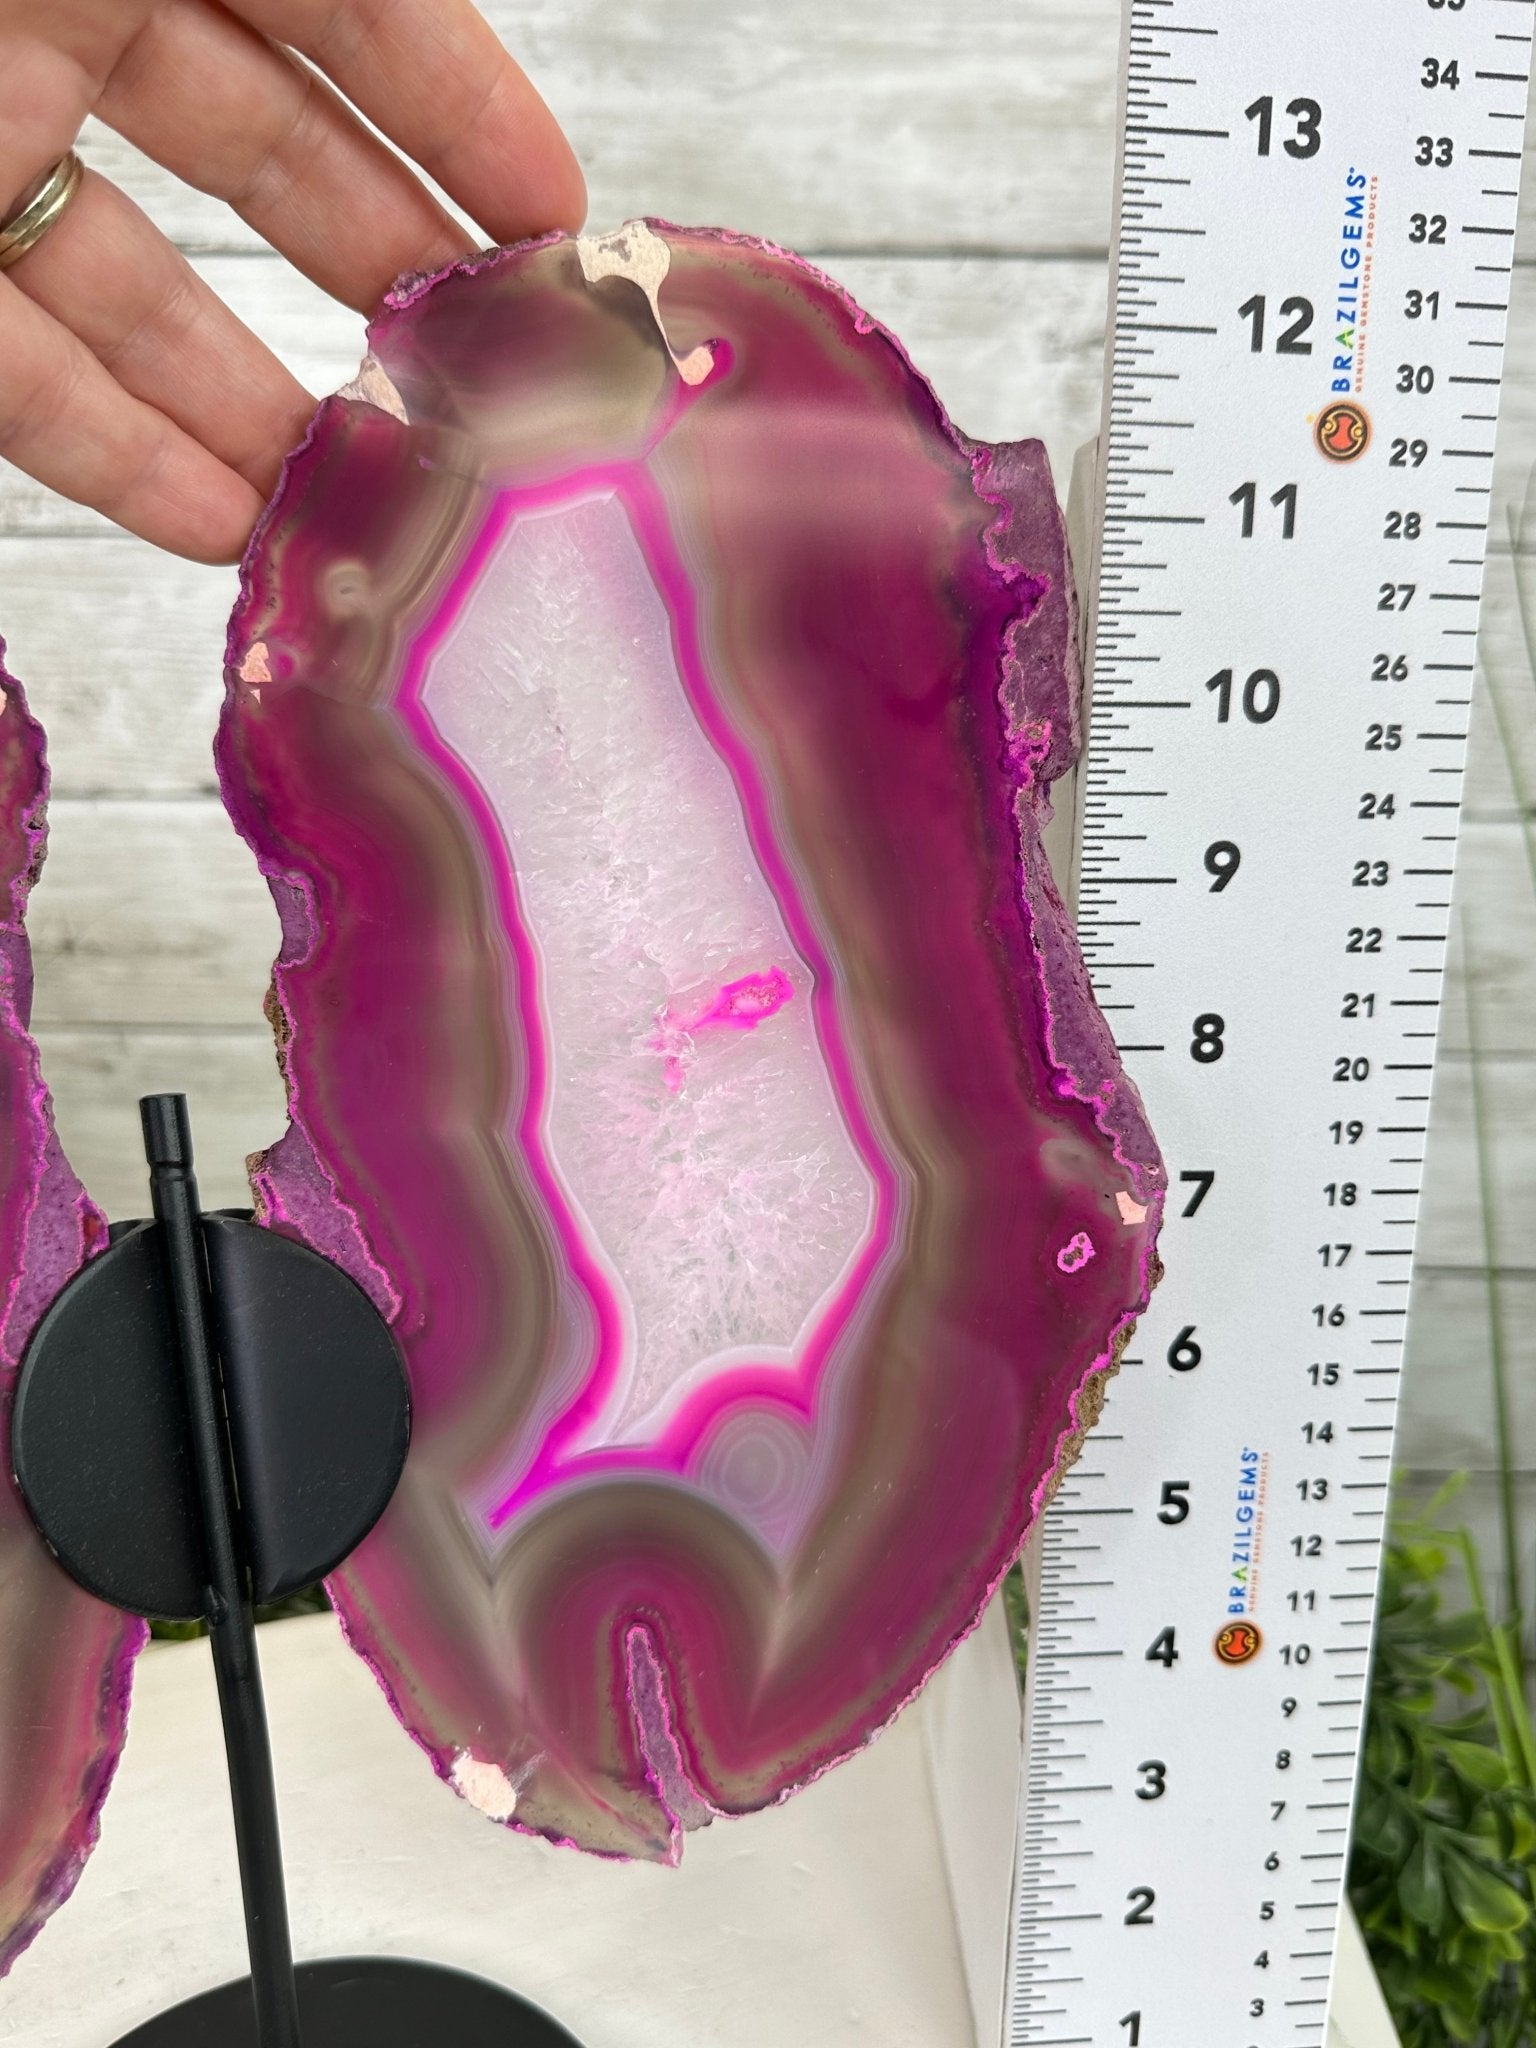 Brazilian Pink Agate "Butterfly Wings", Dyed Pink, 12.8" Tall #5050PA-069 by Brazil Gems - Brazil GemsBrazil GemsBrazilian Pink Agate "Butterfly Wings", Dyed Pink, 12.8" Tall #5050PA-069 by Brazil GemsAgate Butterfly Wings5050PA-069